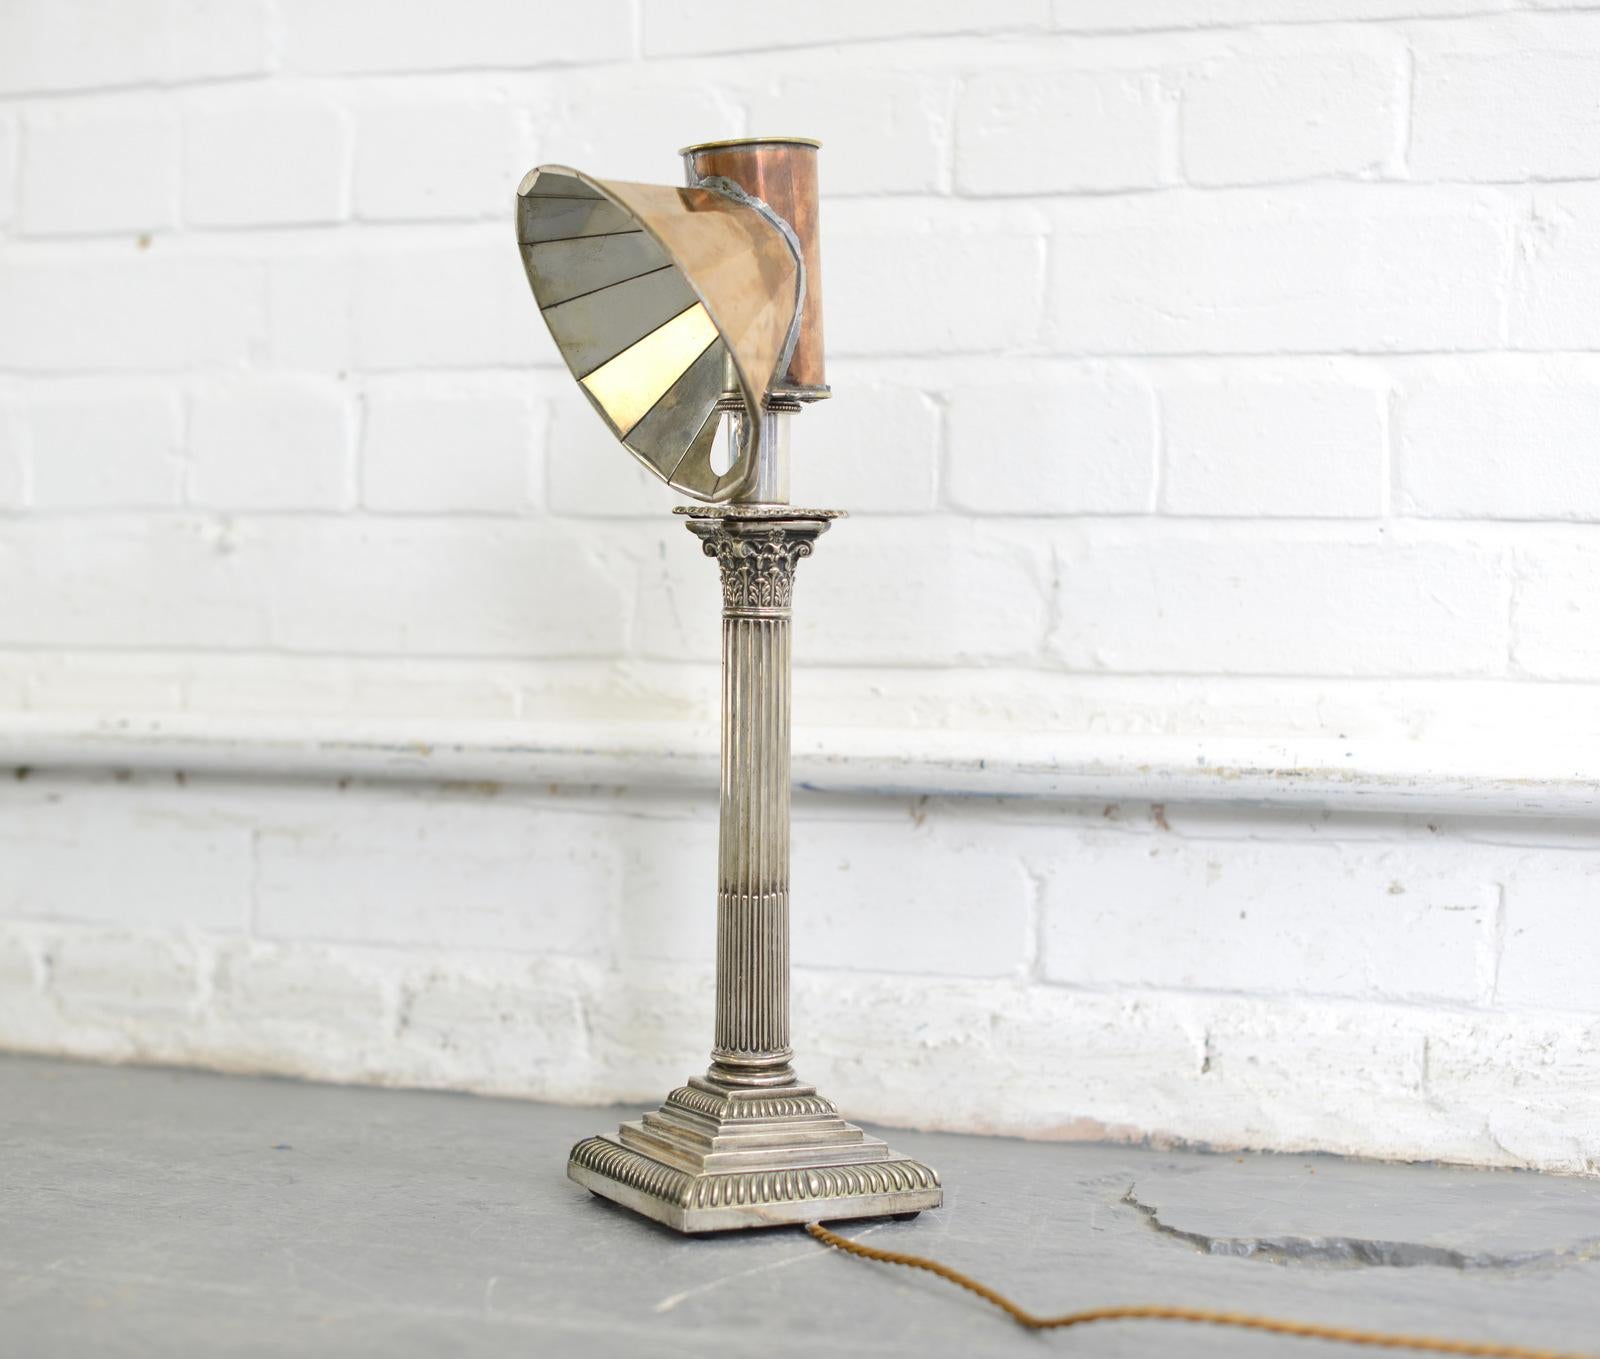 Miller's of London reading lamp, circa 1880

- Brass shade with polished silver reflector
- Silver plated 
- Shade turns to direct the light
- Takes E14 bulbs
- Made by Miller & Sons, Piccadilly, London
- English, 1880
- 47cm tall x 12cm